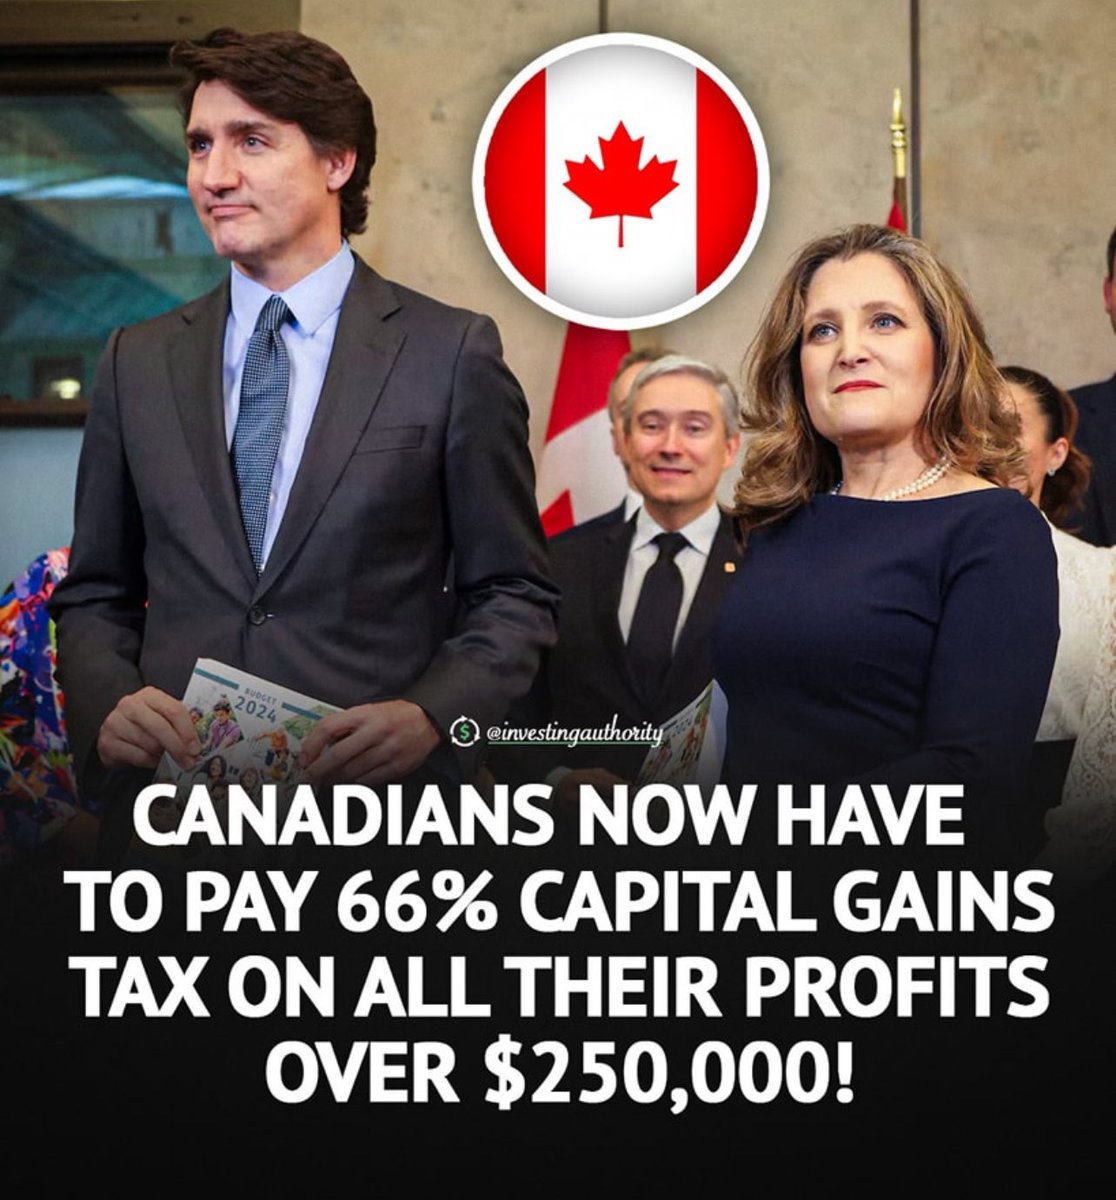 Non stop all the way till 100% I guess? CasTreau is bankrupting Canadians on purpose. I bet this money will go straight to the alphabet people and the assisted suicide business.